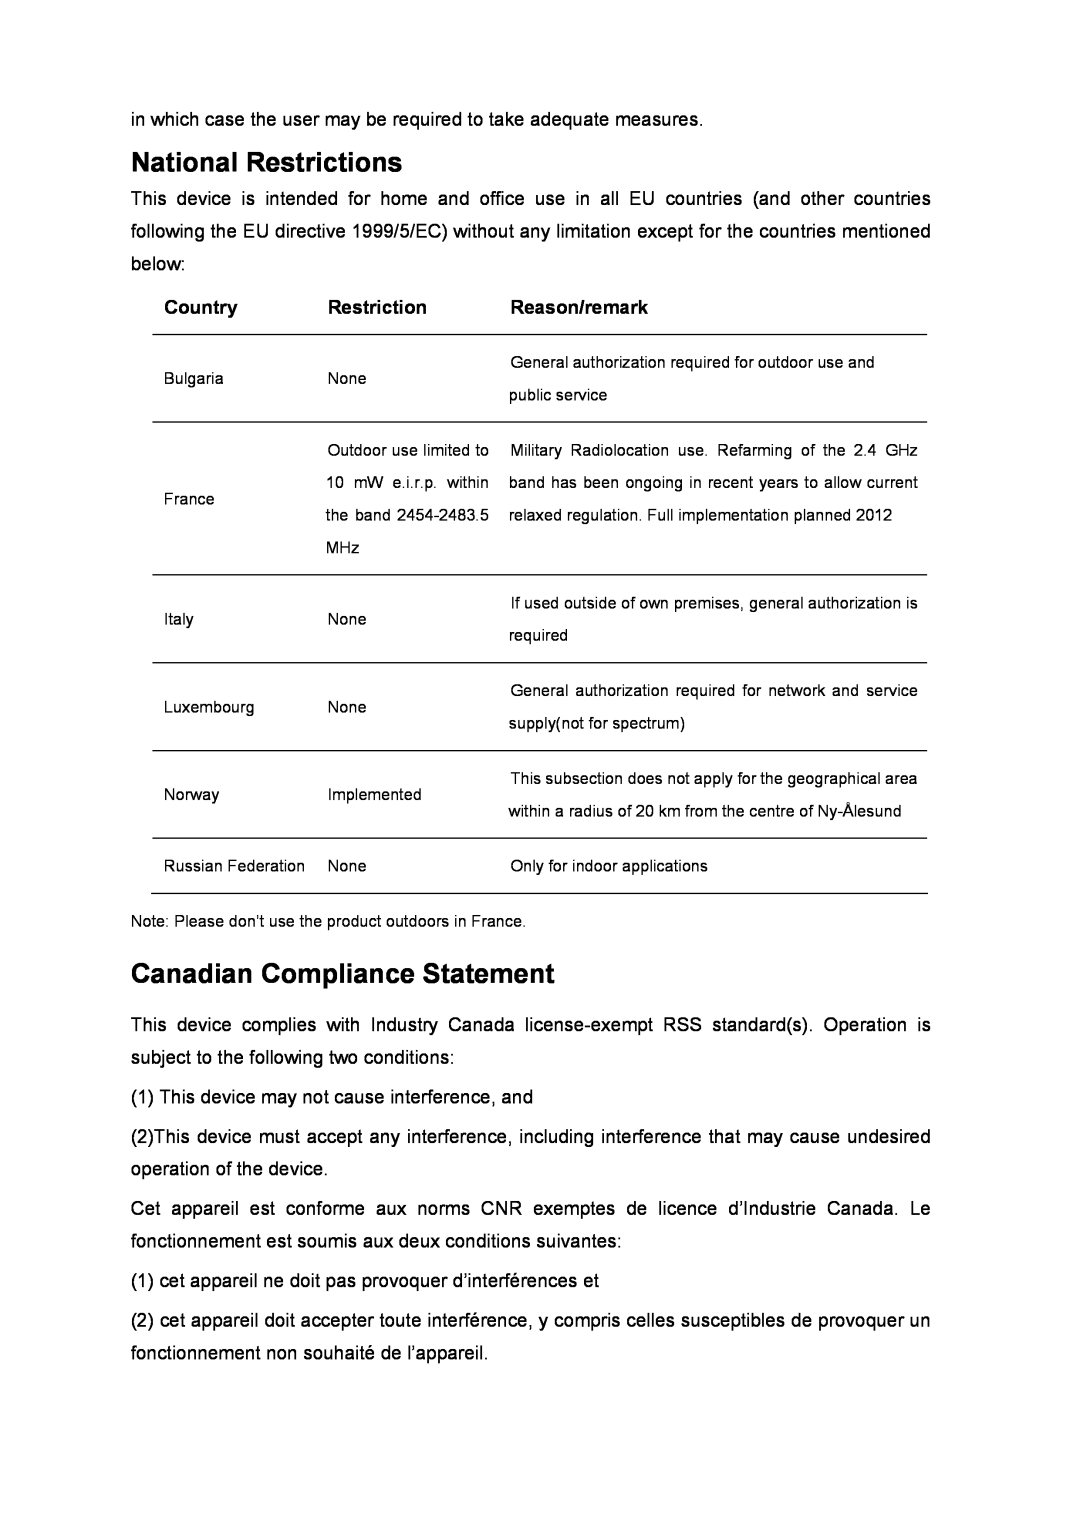 TP-Link TL-WDN4200 manual National Restrictions, Canadian Compliance Statement, Country Restriction Reason/remark 